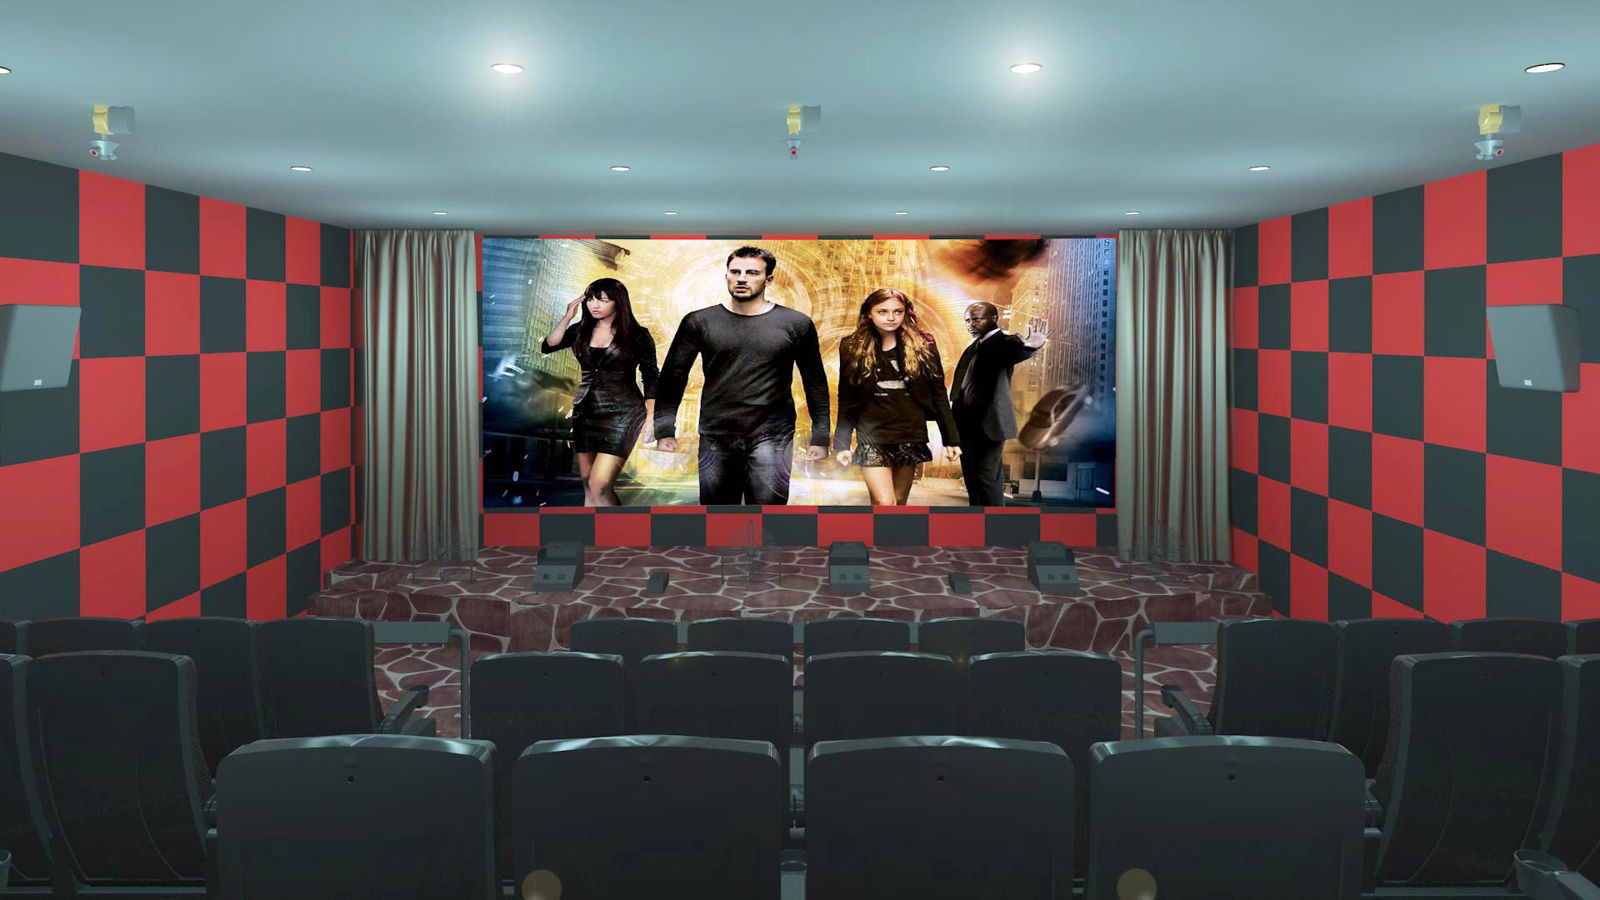 5 Seats / 4D Cinema System，Luxury Motion Seats With Spray Air And Vibration 3